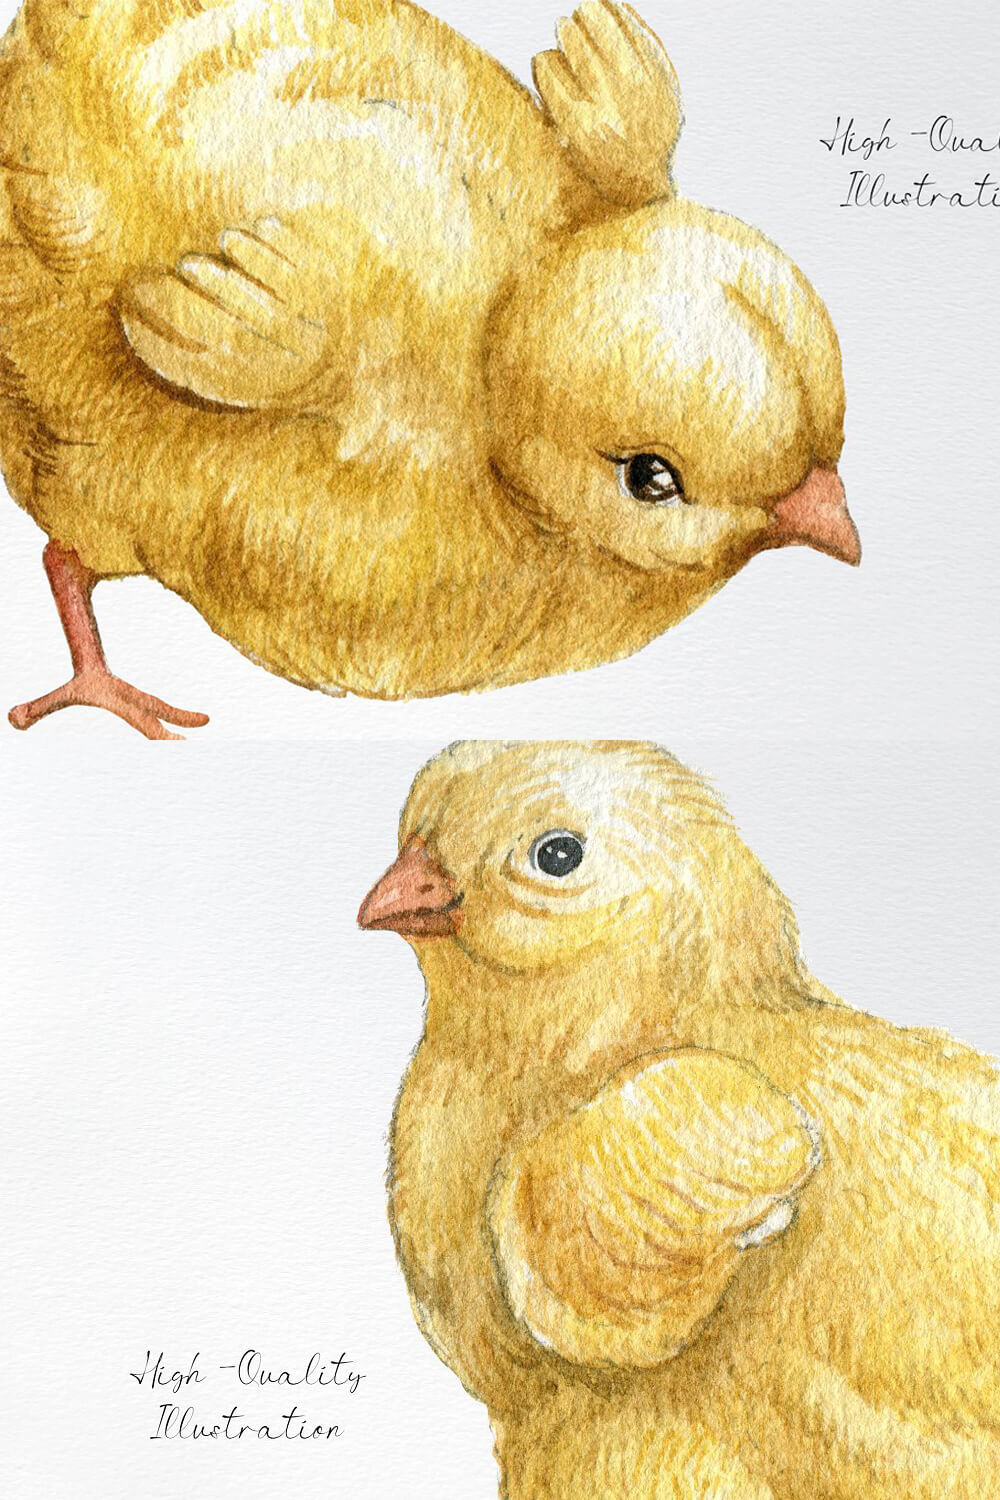 High-Quality Illustration chicken clipart.